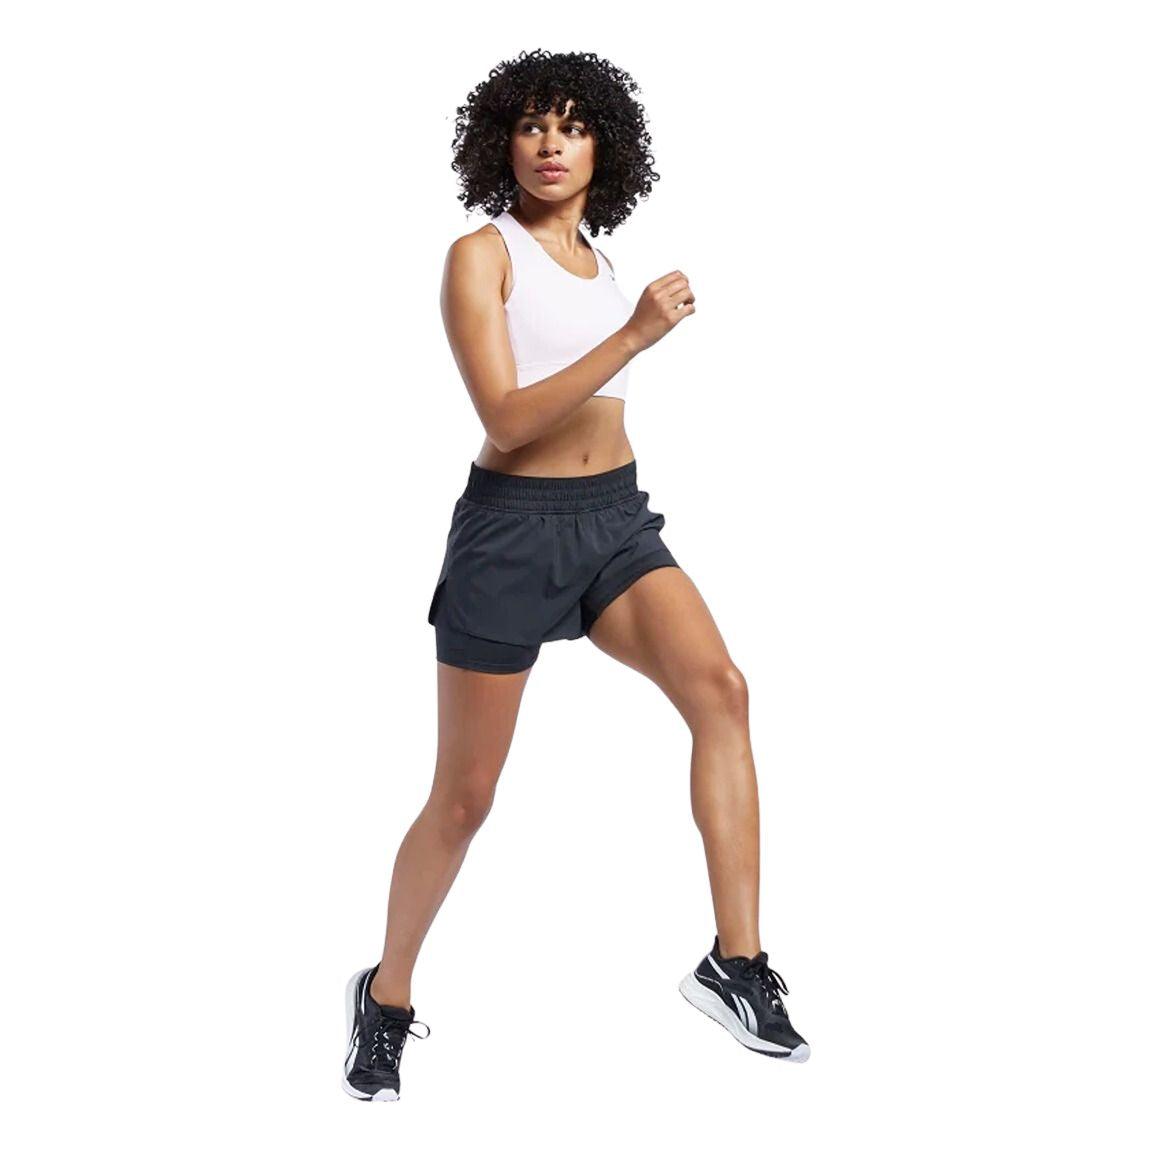 Reebok Running Two-In-One Shorts - Women - Sports Excellence